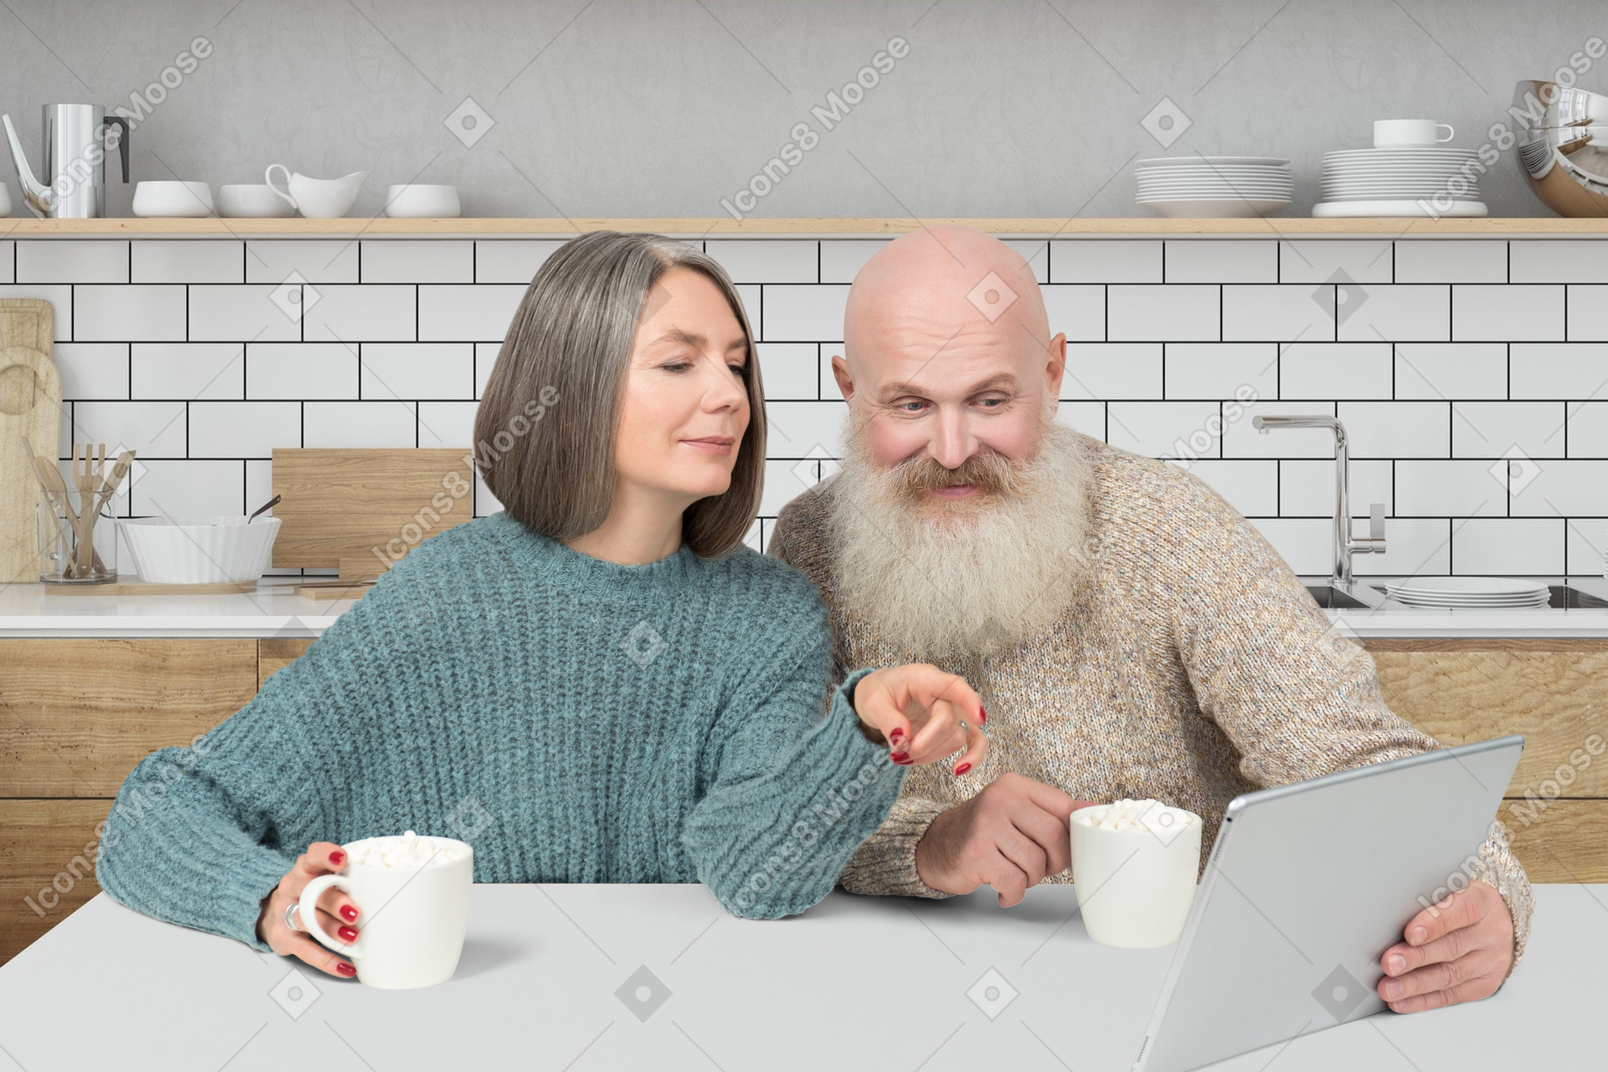 An older couple sitting at the kitchen table and looking at tablet